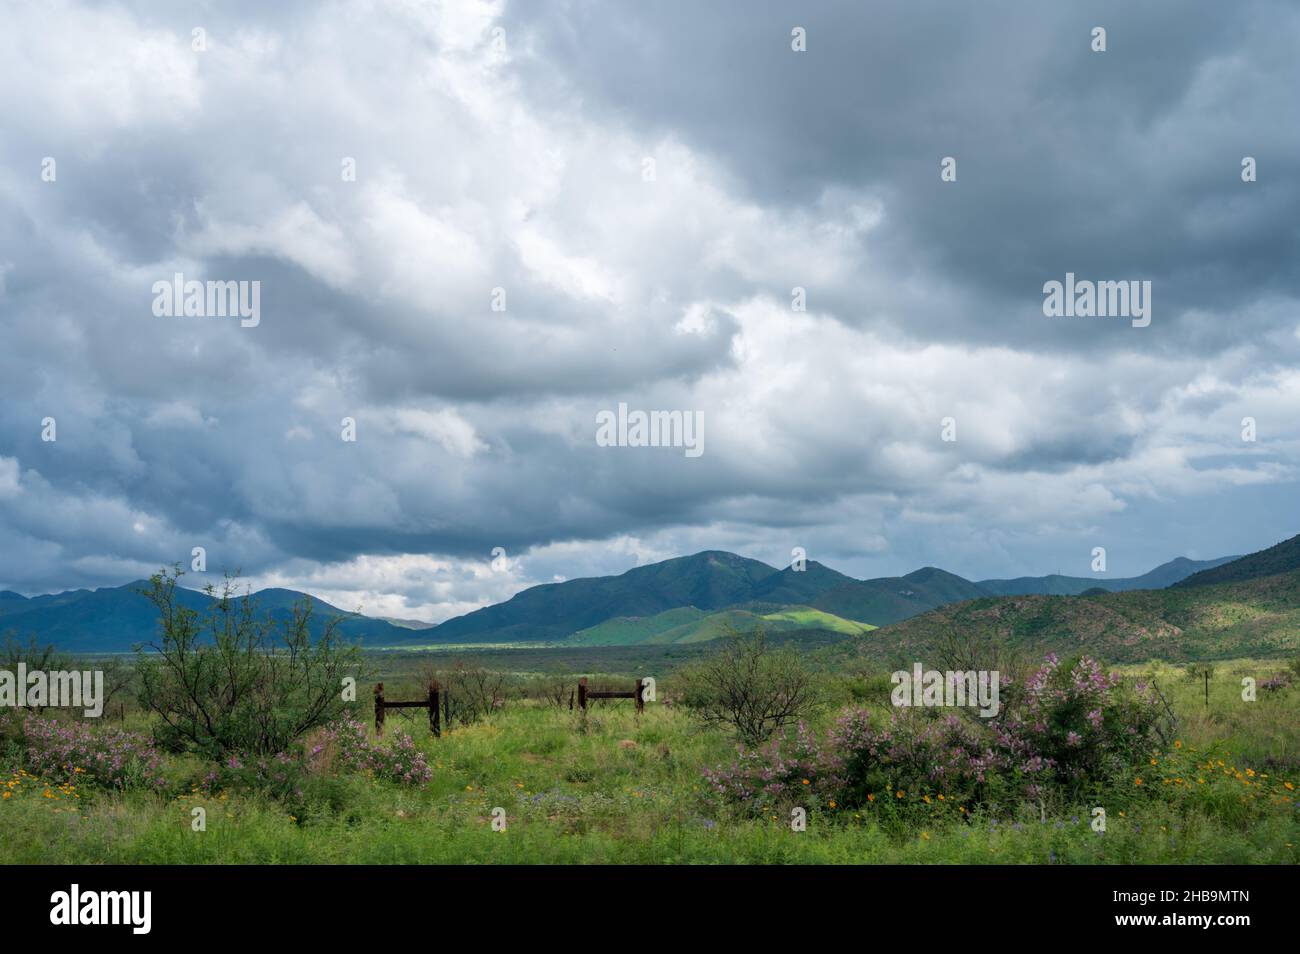 Green pasture with flowers and mountains in distance, dark clouds Stock Photo